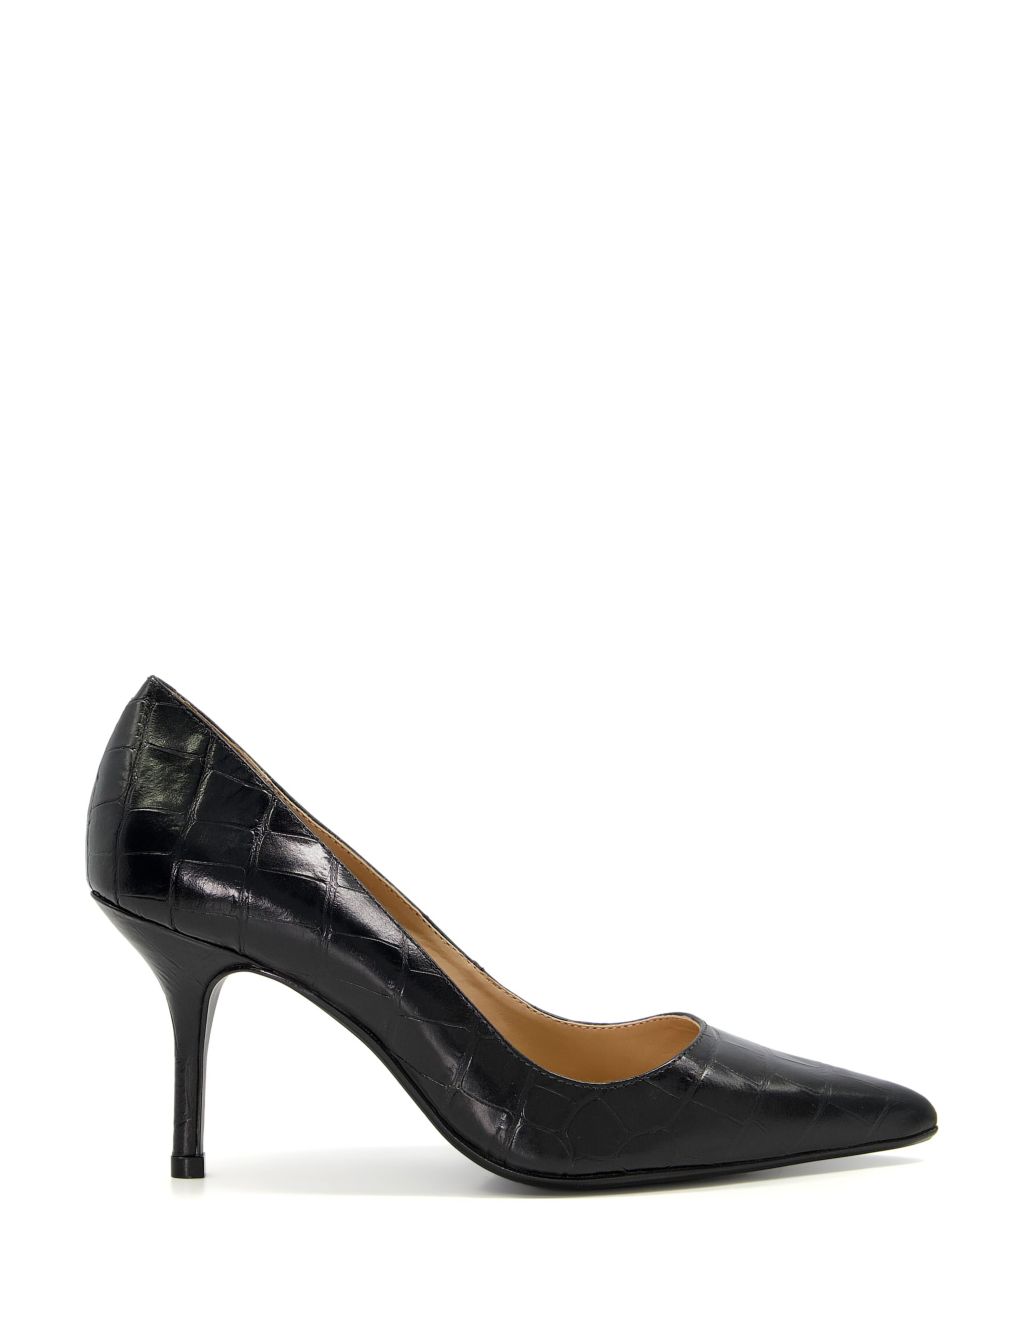 Leather Croc Stiletto Pointed Court Shoes image 2